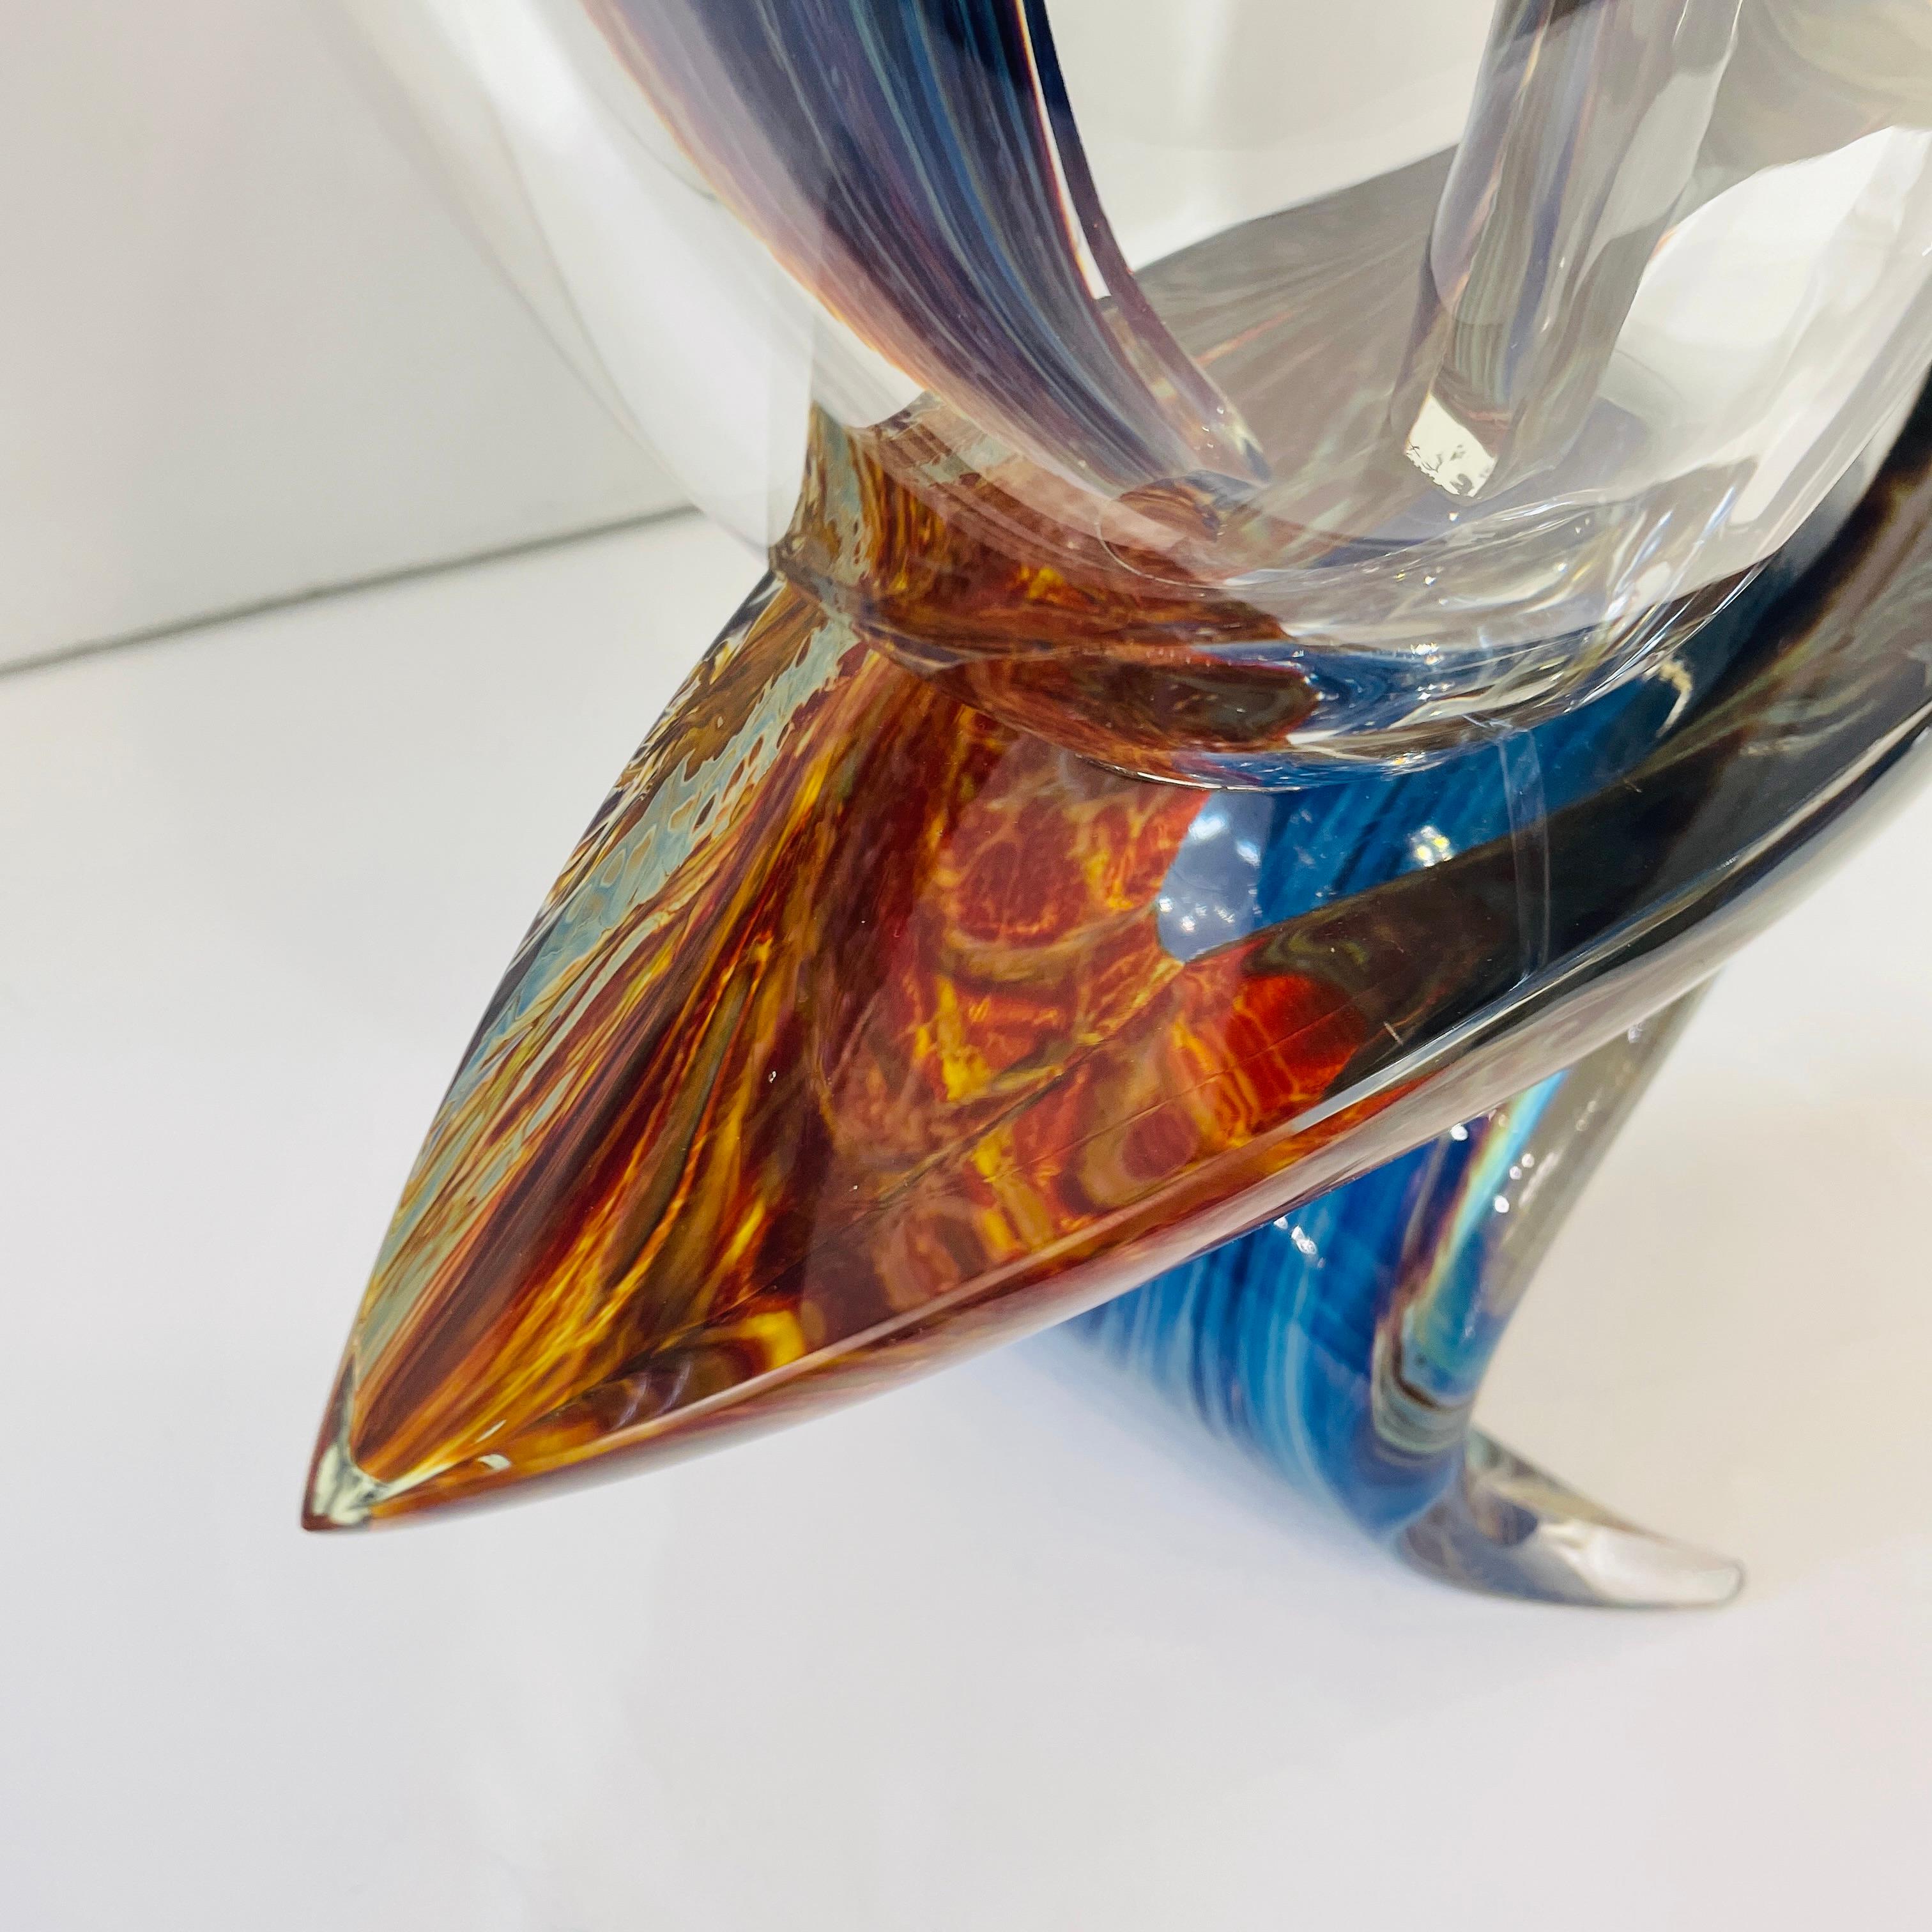 2015 Italian Yellow Blue Brown Crystal Murano Glass Boat Modernist Art Sculpture For Sale 7